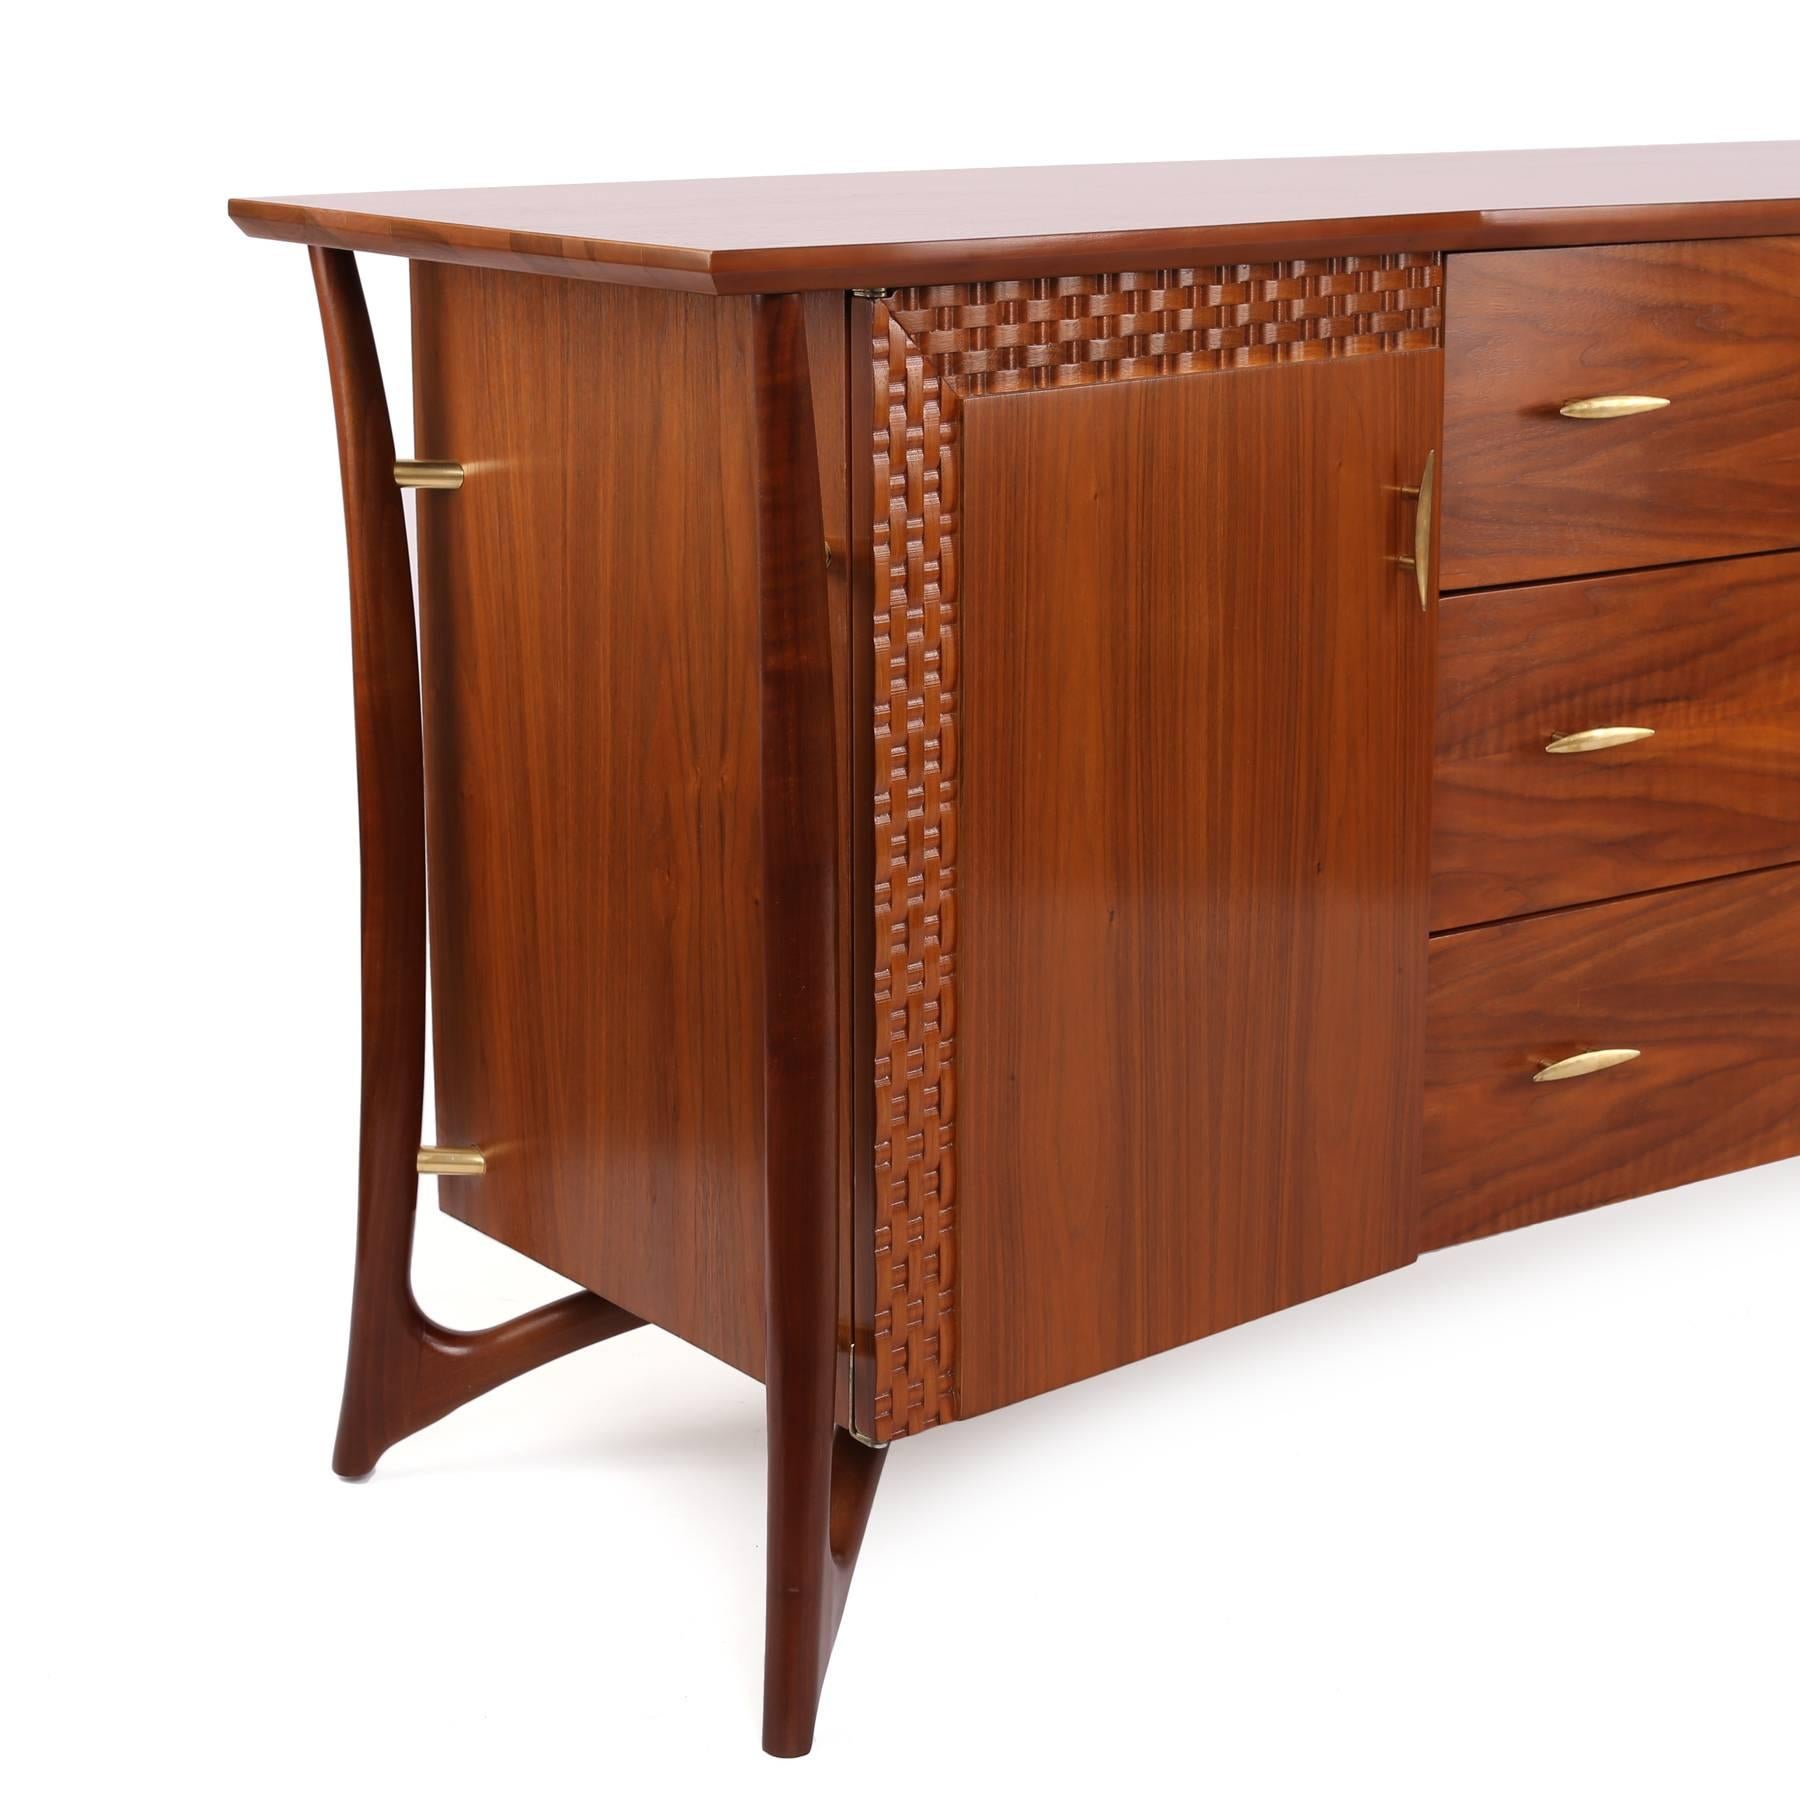 Stunning walnut and brass chest by Piet Hein circa late 1950s. This sculptural example has hand formed solid walnut legs woven wood detailing and patinated brass hardware. It has nine drawers, three large exterior and six interior and has been newly